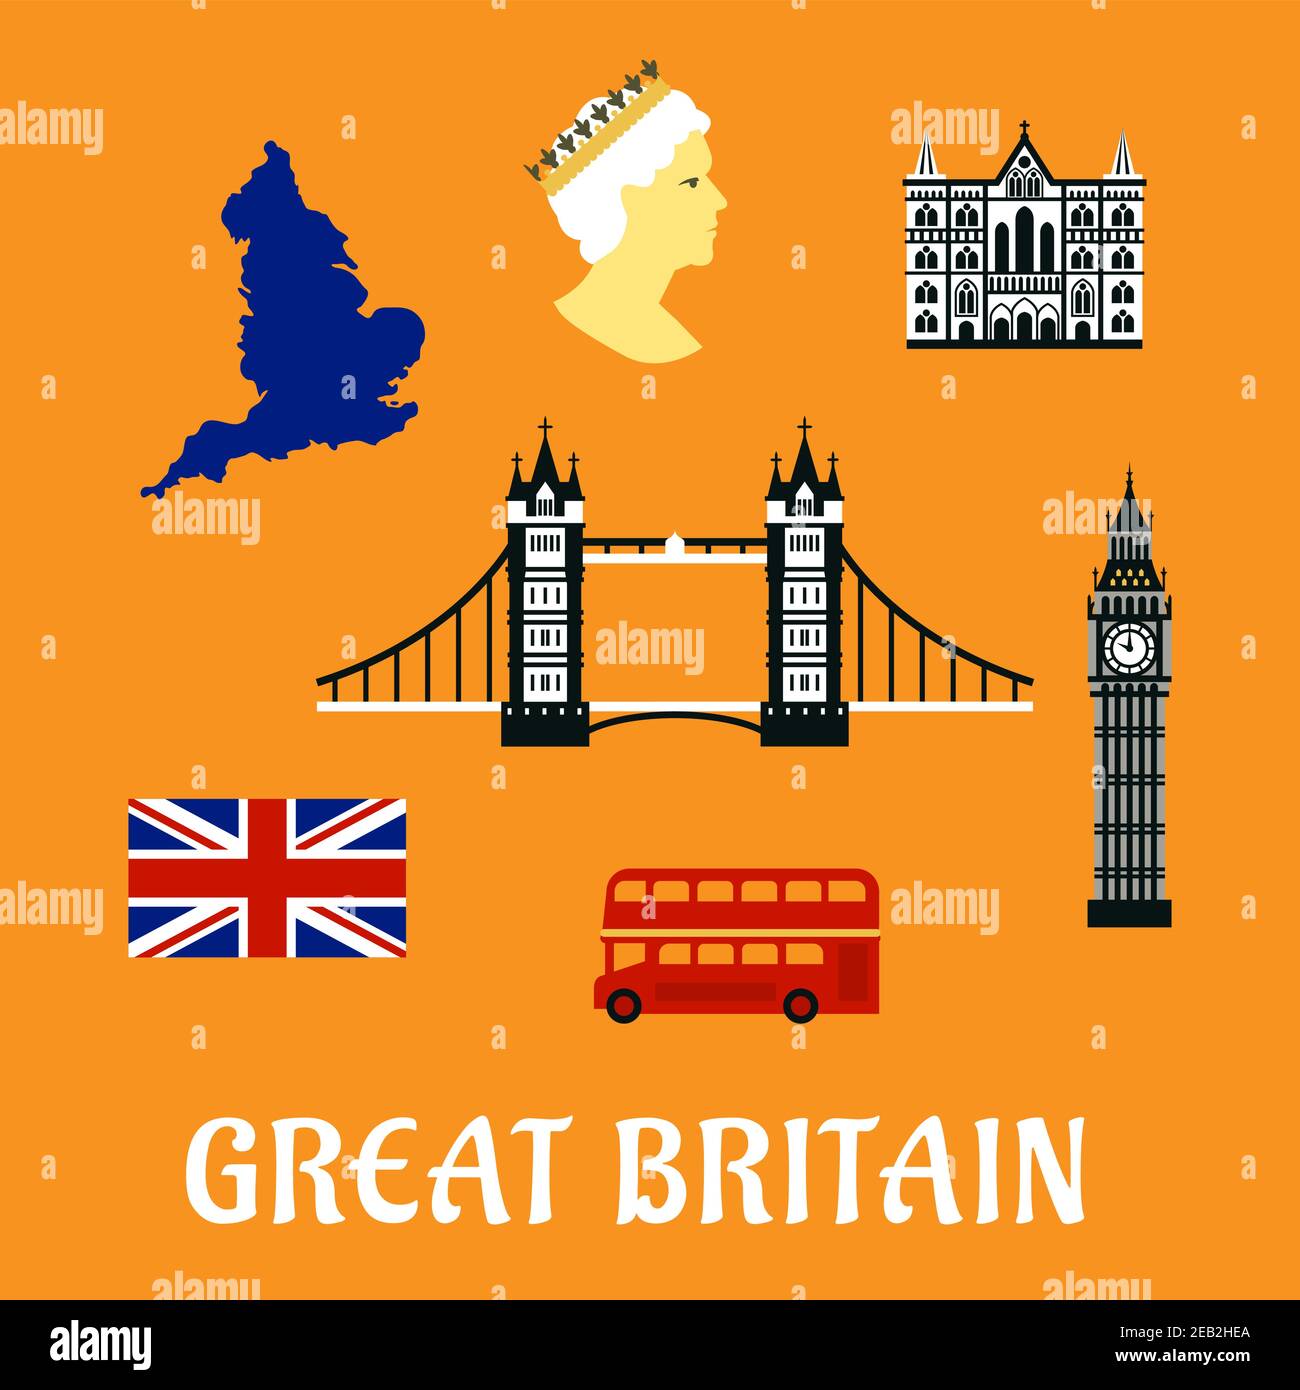 Great Britain travel flat symbols and icons of national flag, map, Tower bridge, Big Ben, cathedral and double decker red london bus Stock Vector